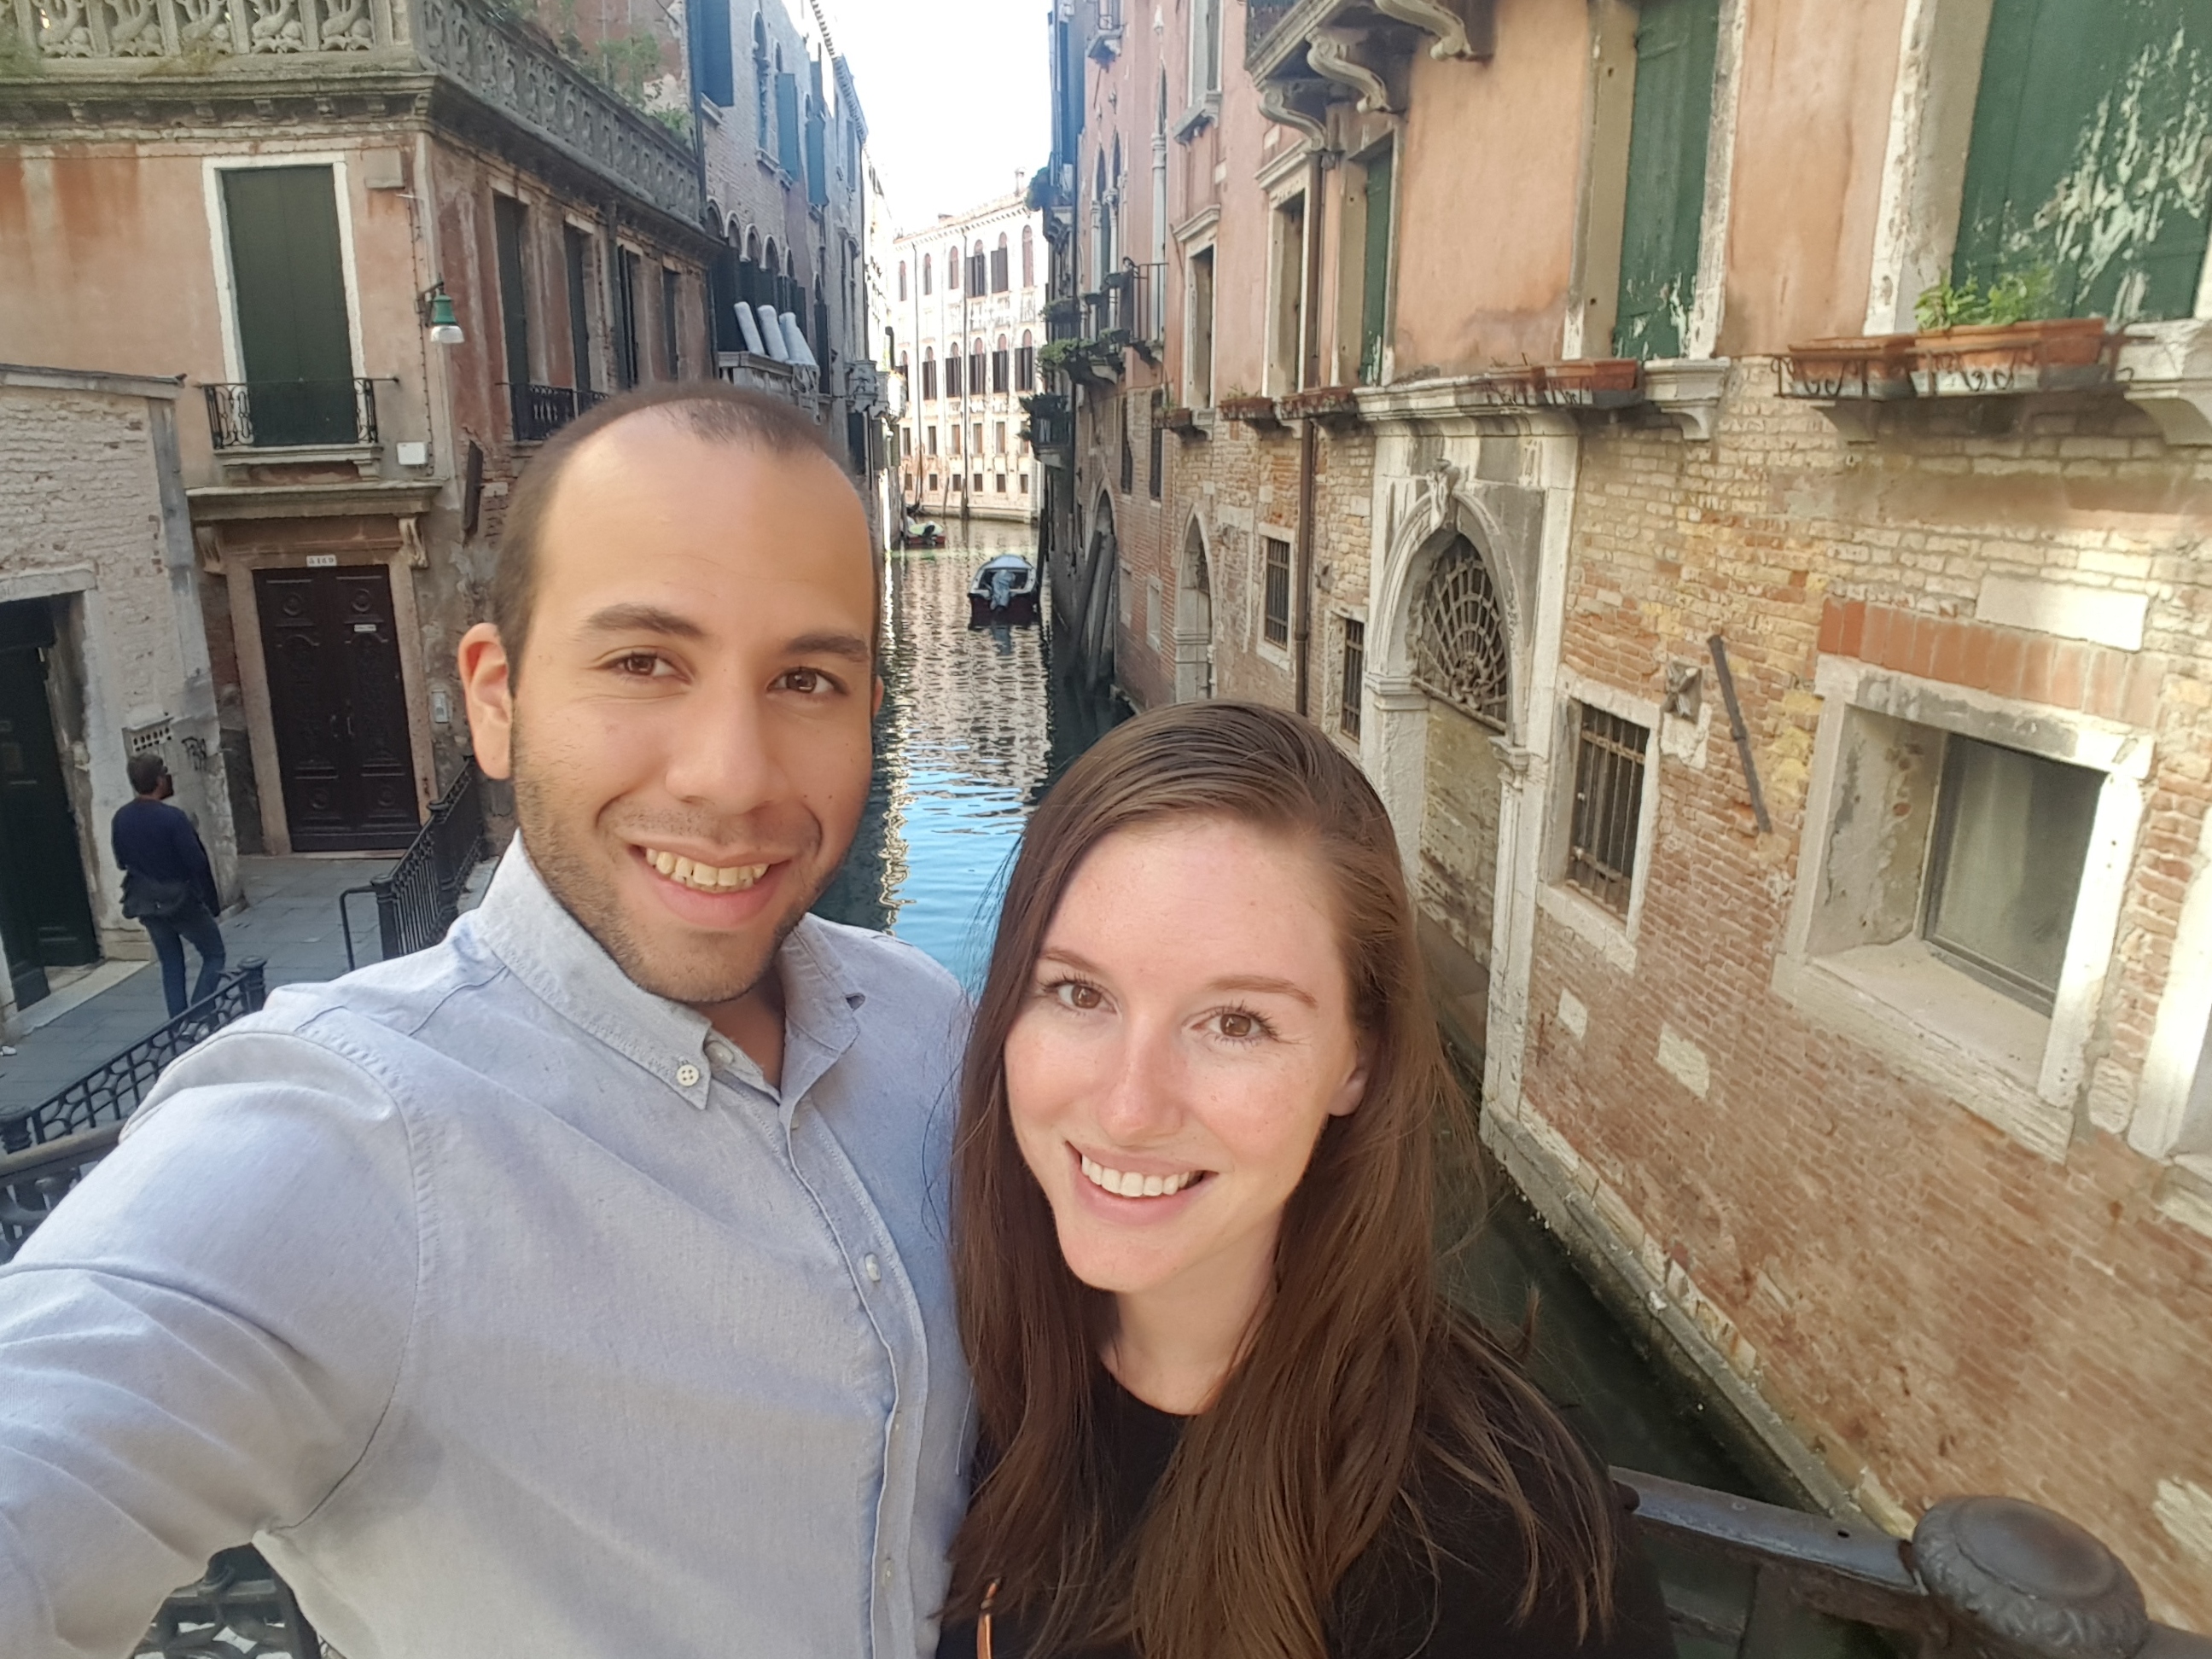 Alyssa and Michael in front of canals in Venice